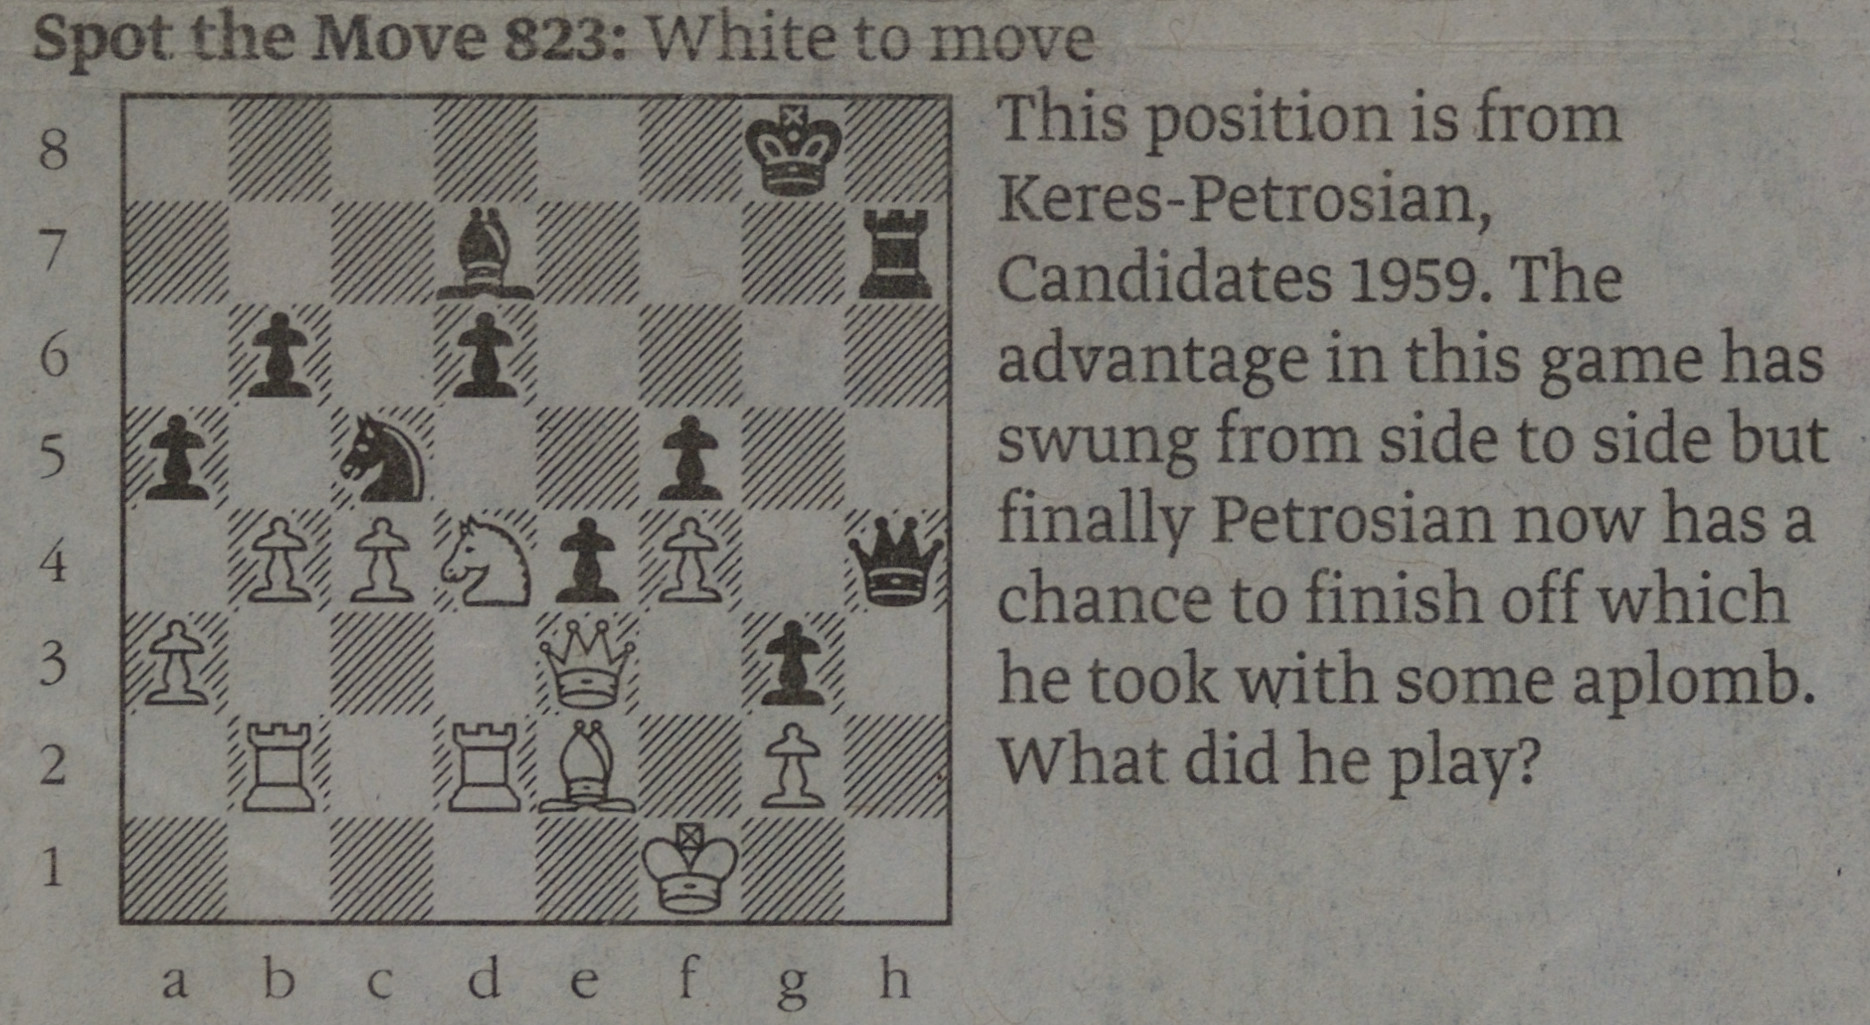 What does 'mate in one' mean in chess? Apparently, I've done it many times  since my buddy keeps telling me it's my favorite checkmate move? - Quora